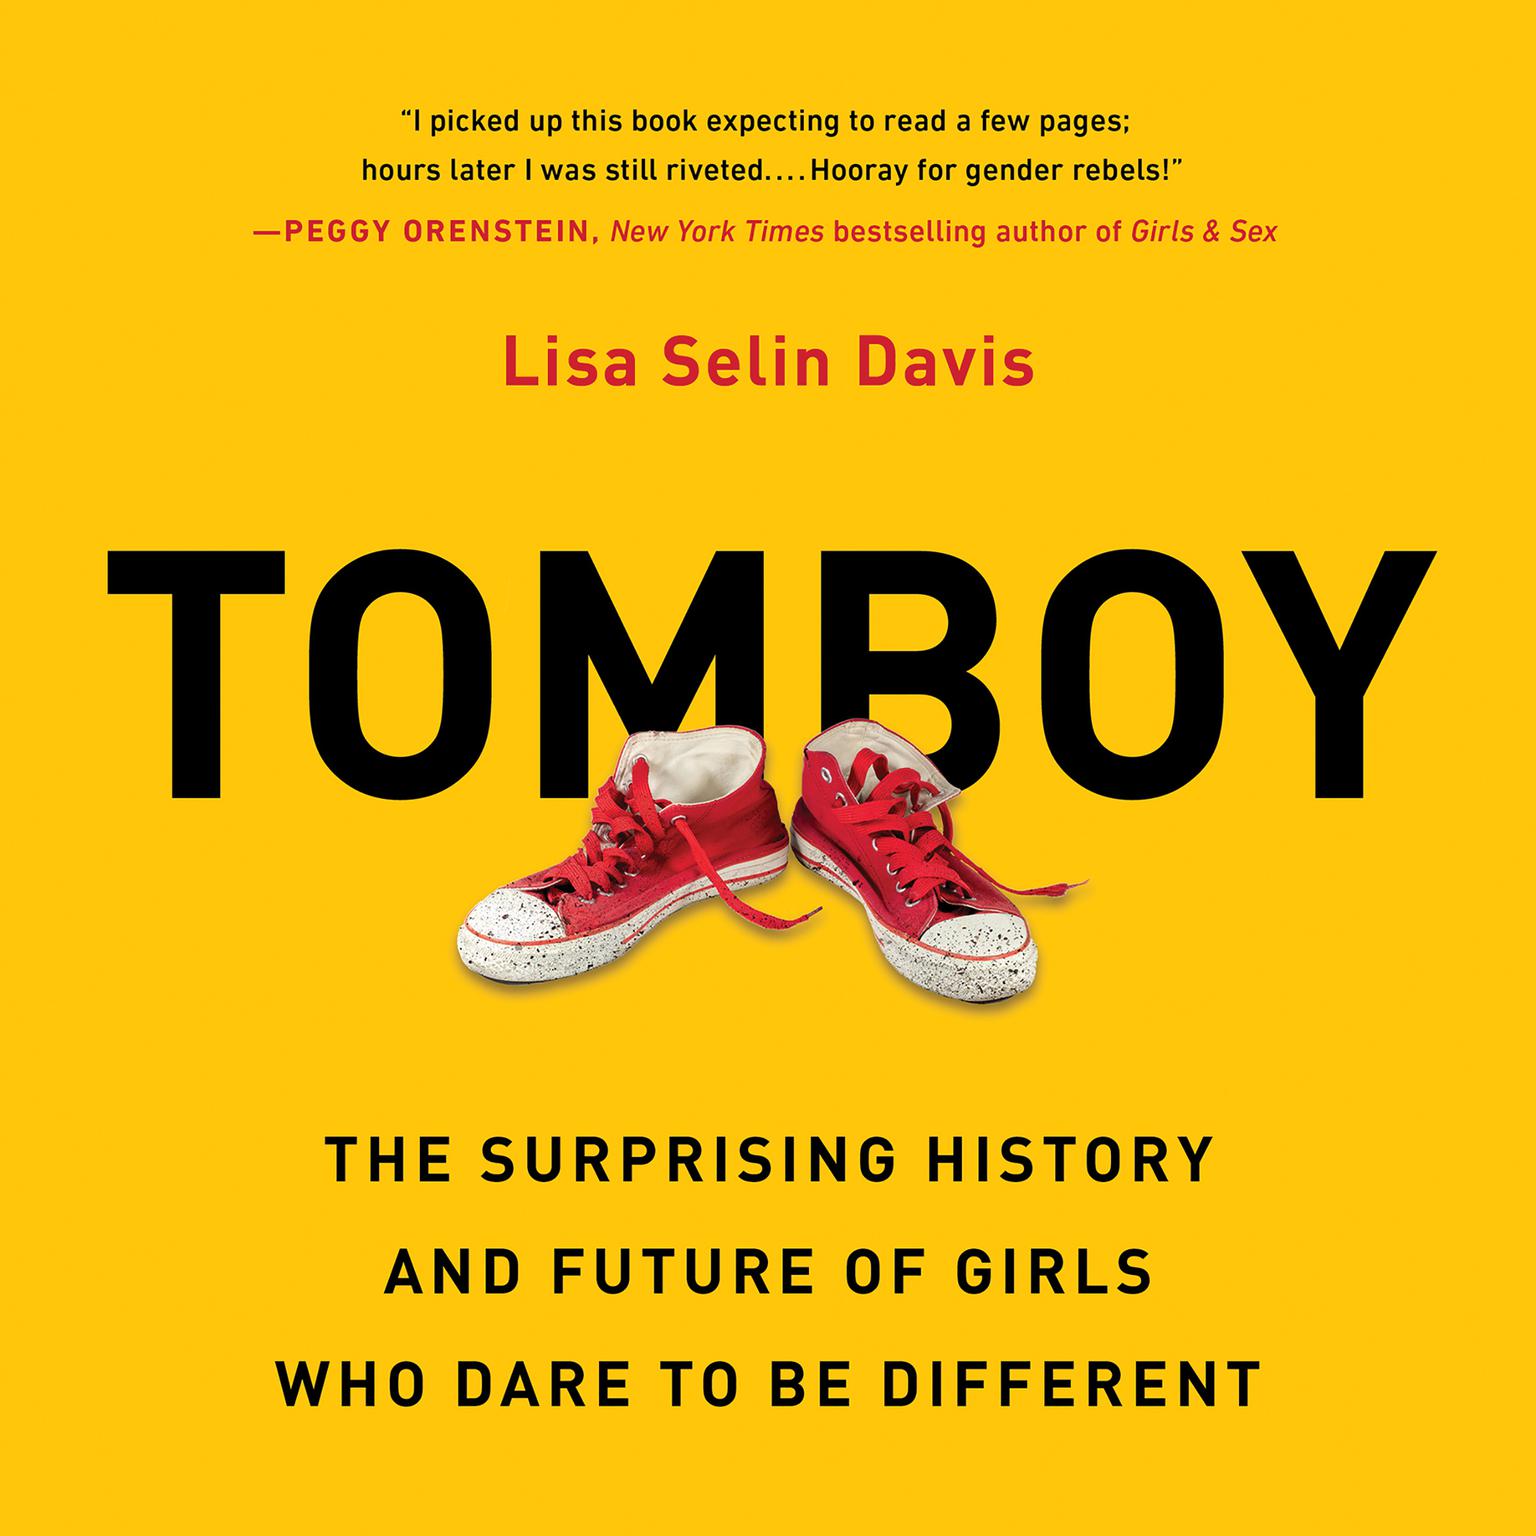 Tomboy: The Surprising History and Future of Girls Who Dare to Be Different Audiobook, by Lisa Selin Davis